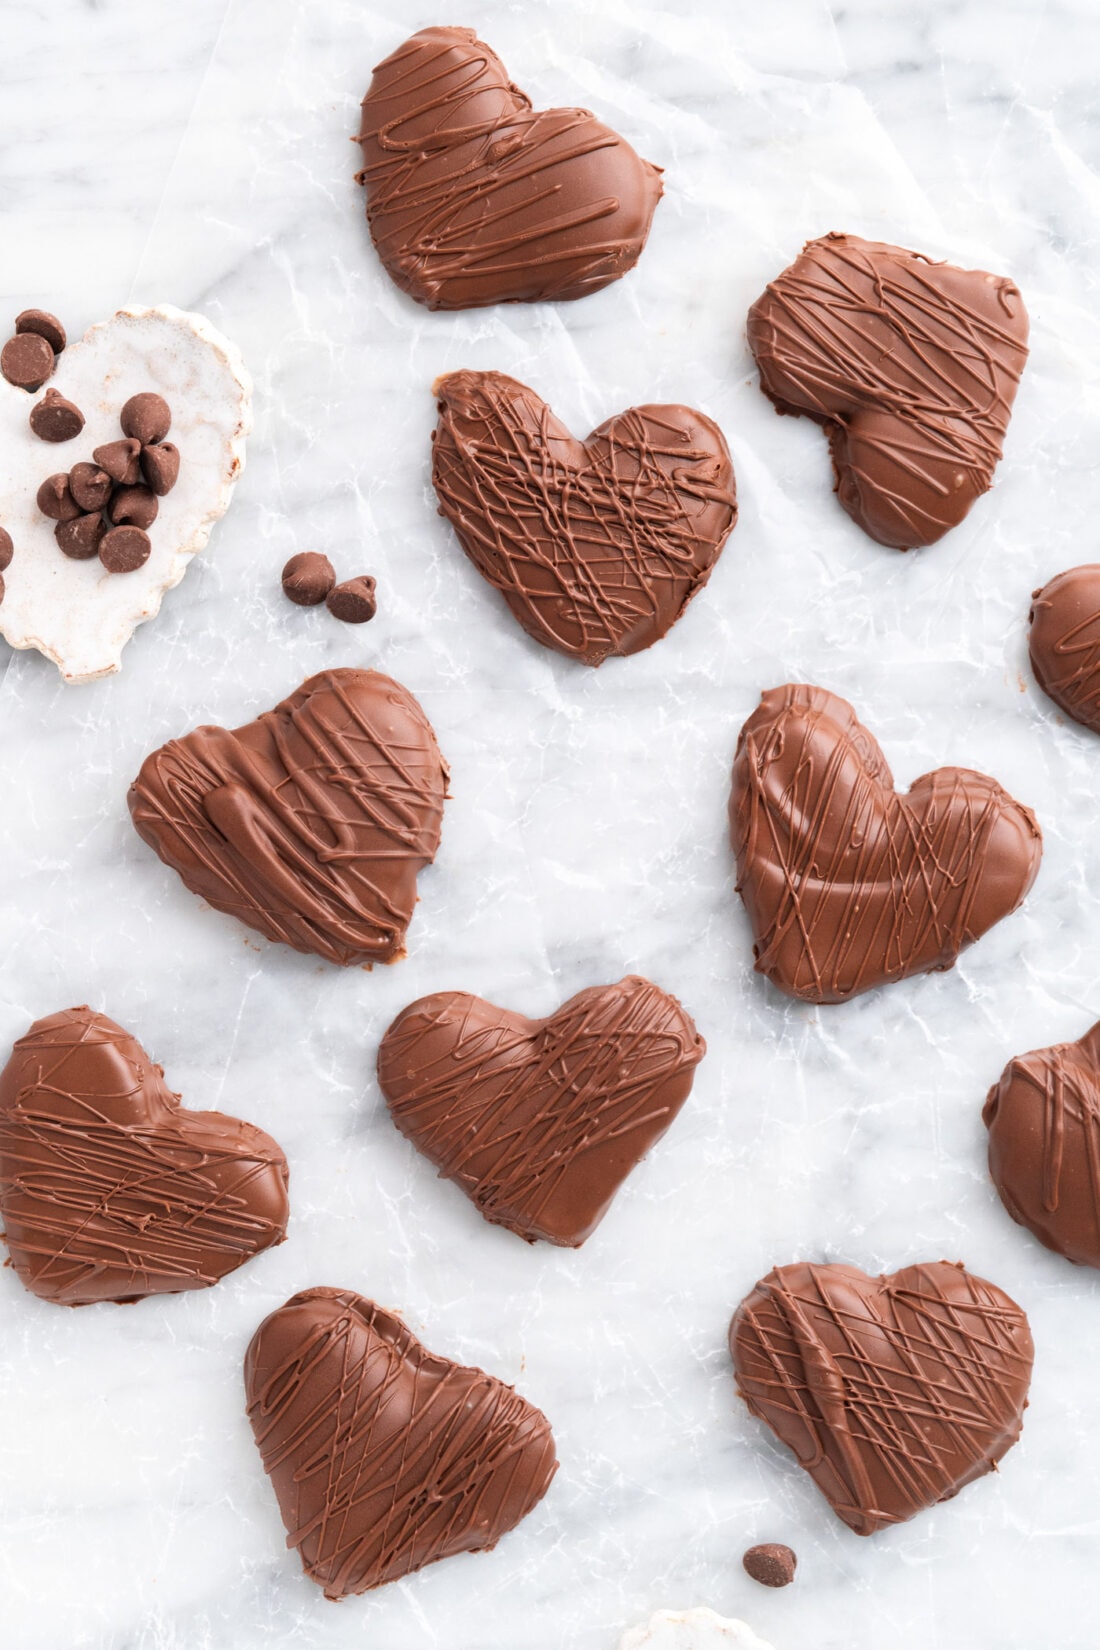 Chocolate Peanut Butter Hearts on a piece of parchment paper with chocolate chips